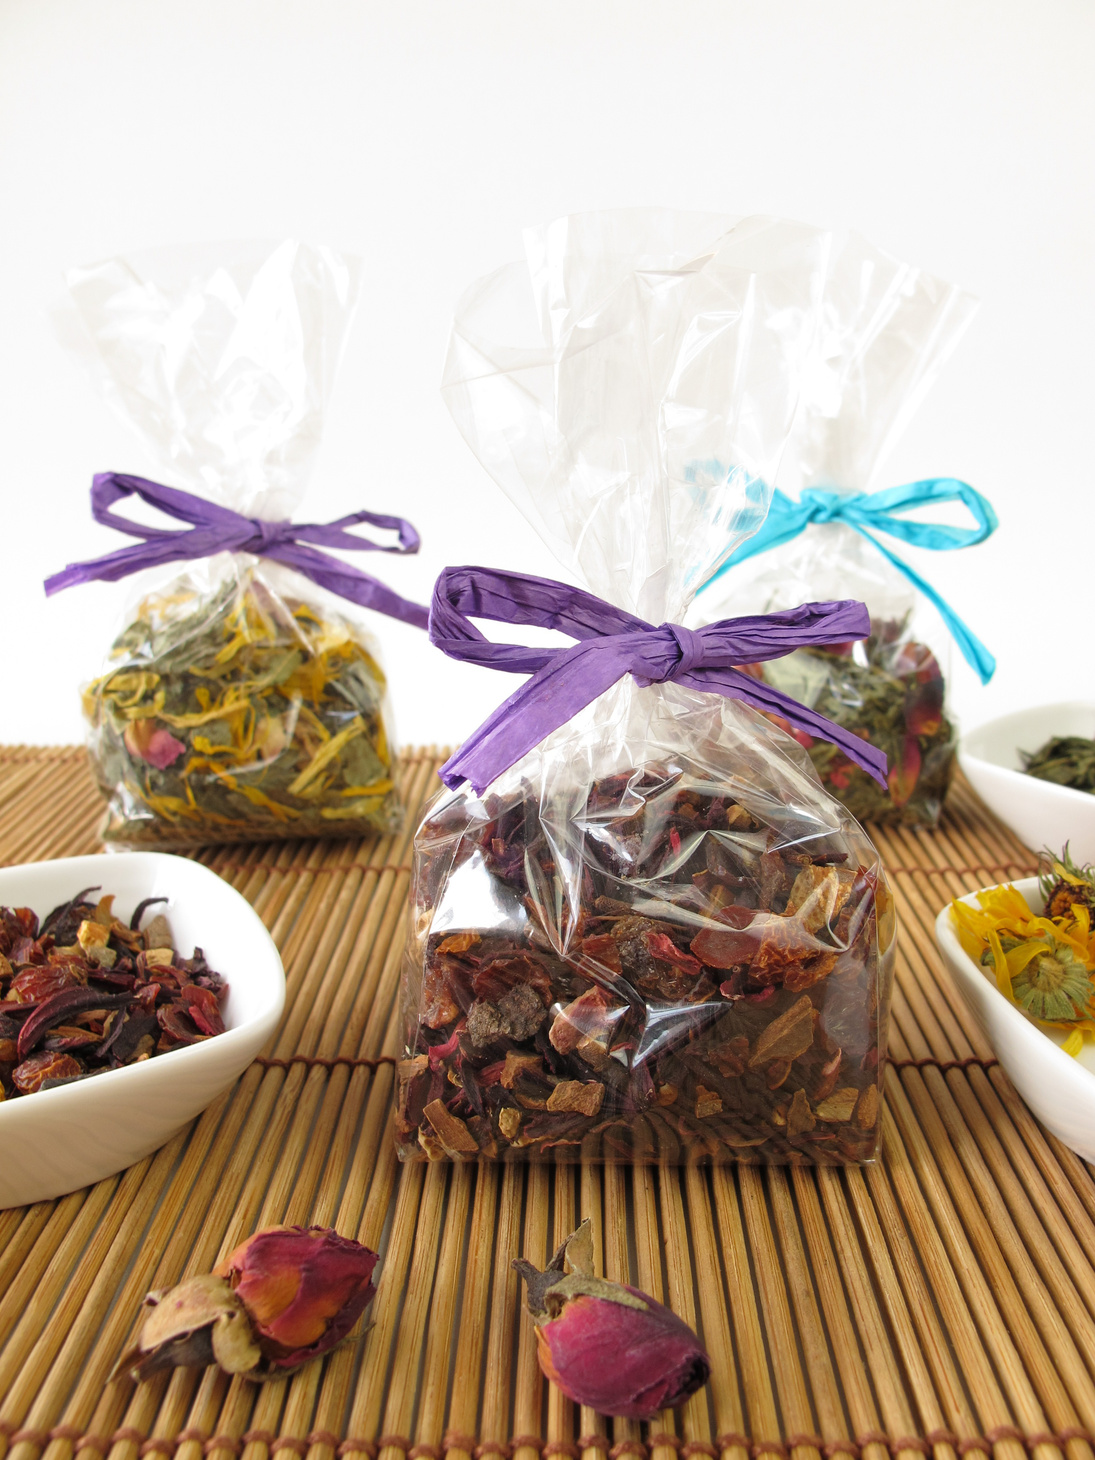 Tea gifts packaged in small bags